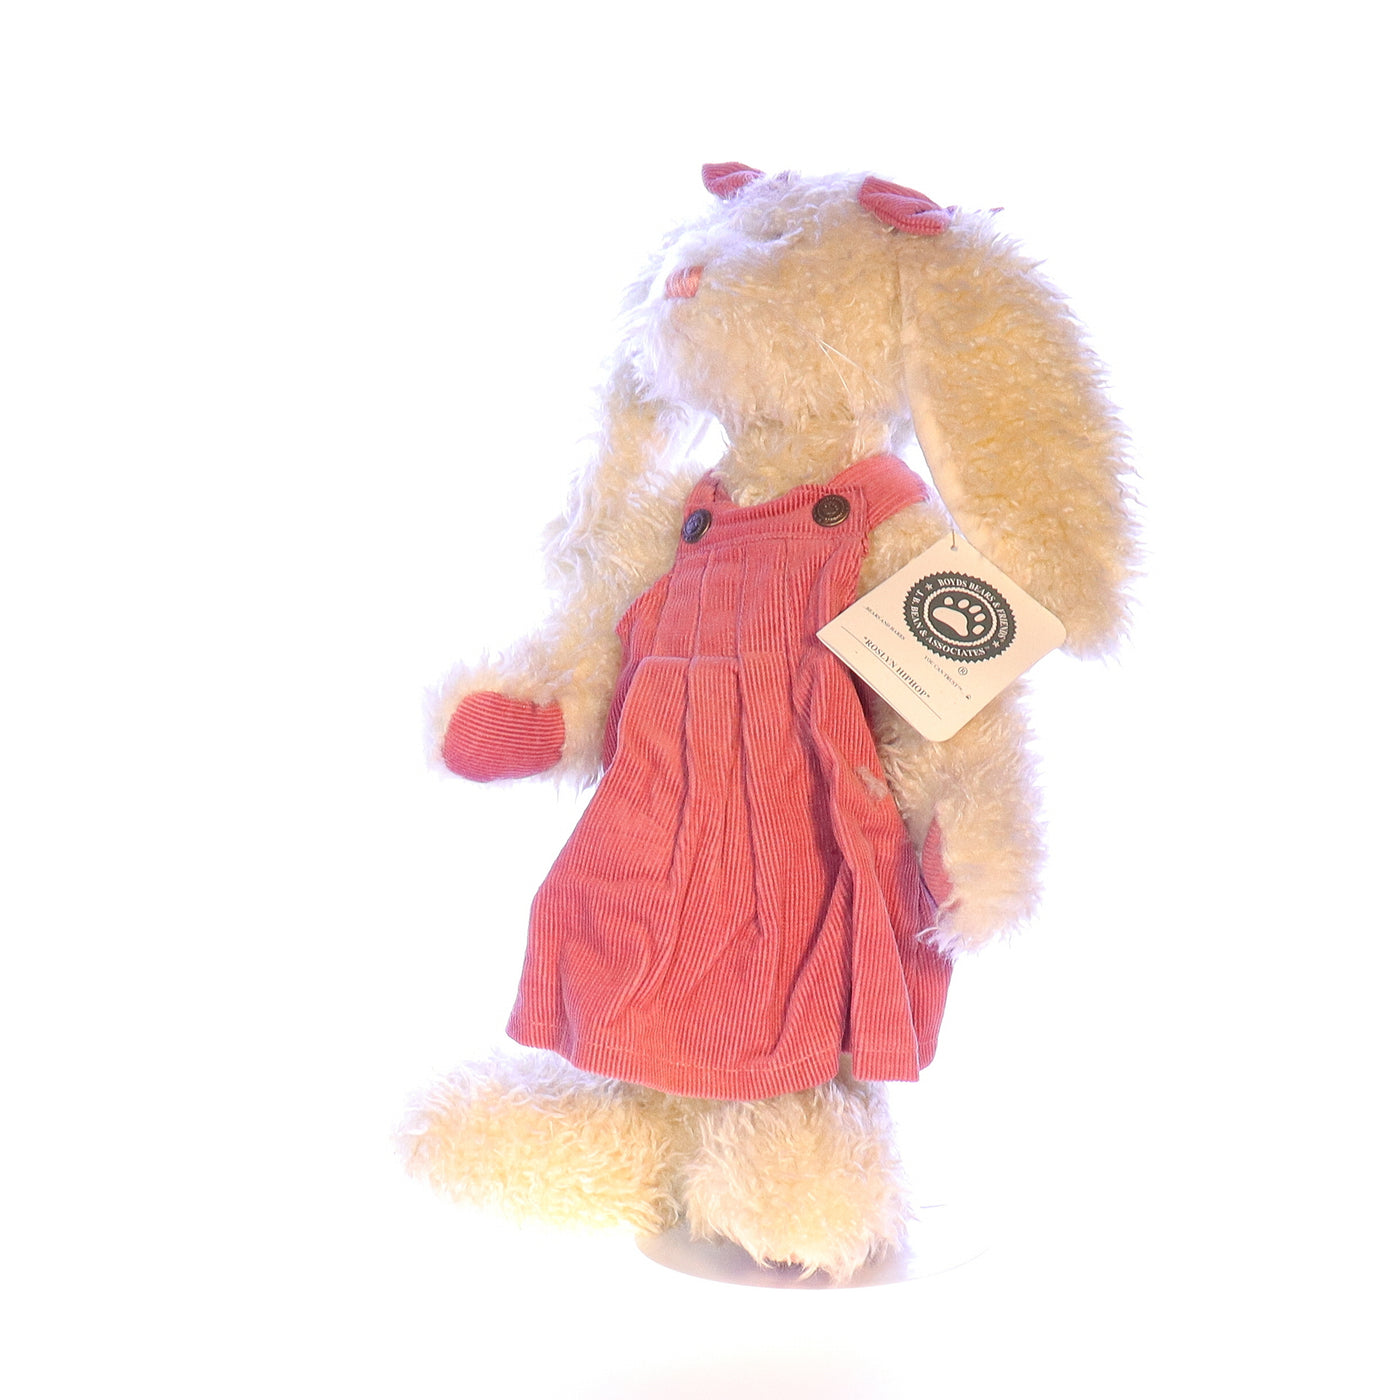 Boyds Bears Collection Plush with Tags Bunny 912080 Roslyn Hiphop 1985 14"